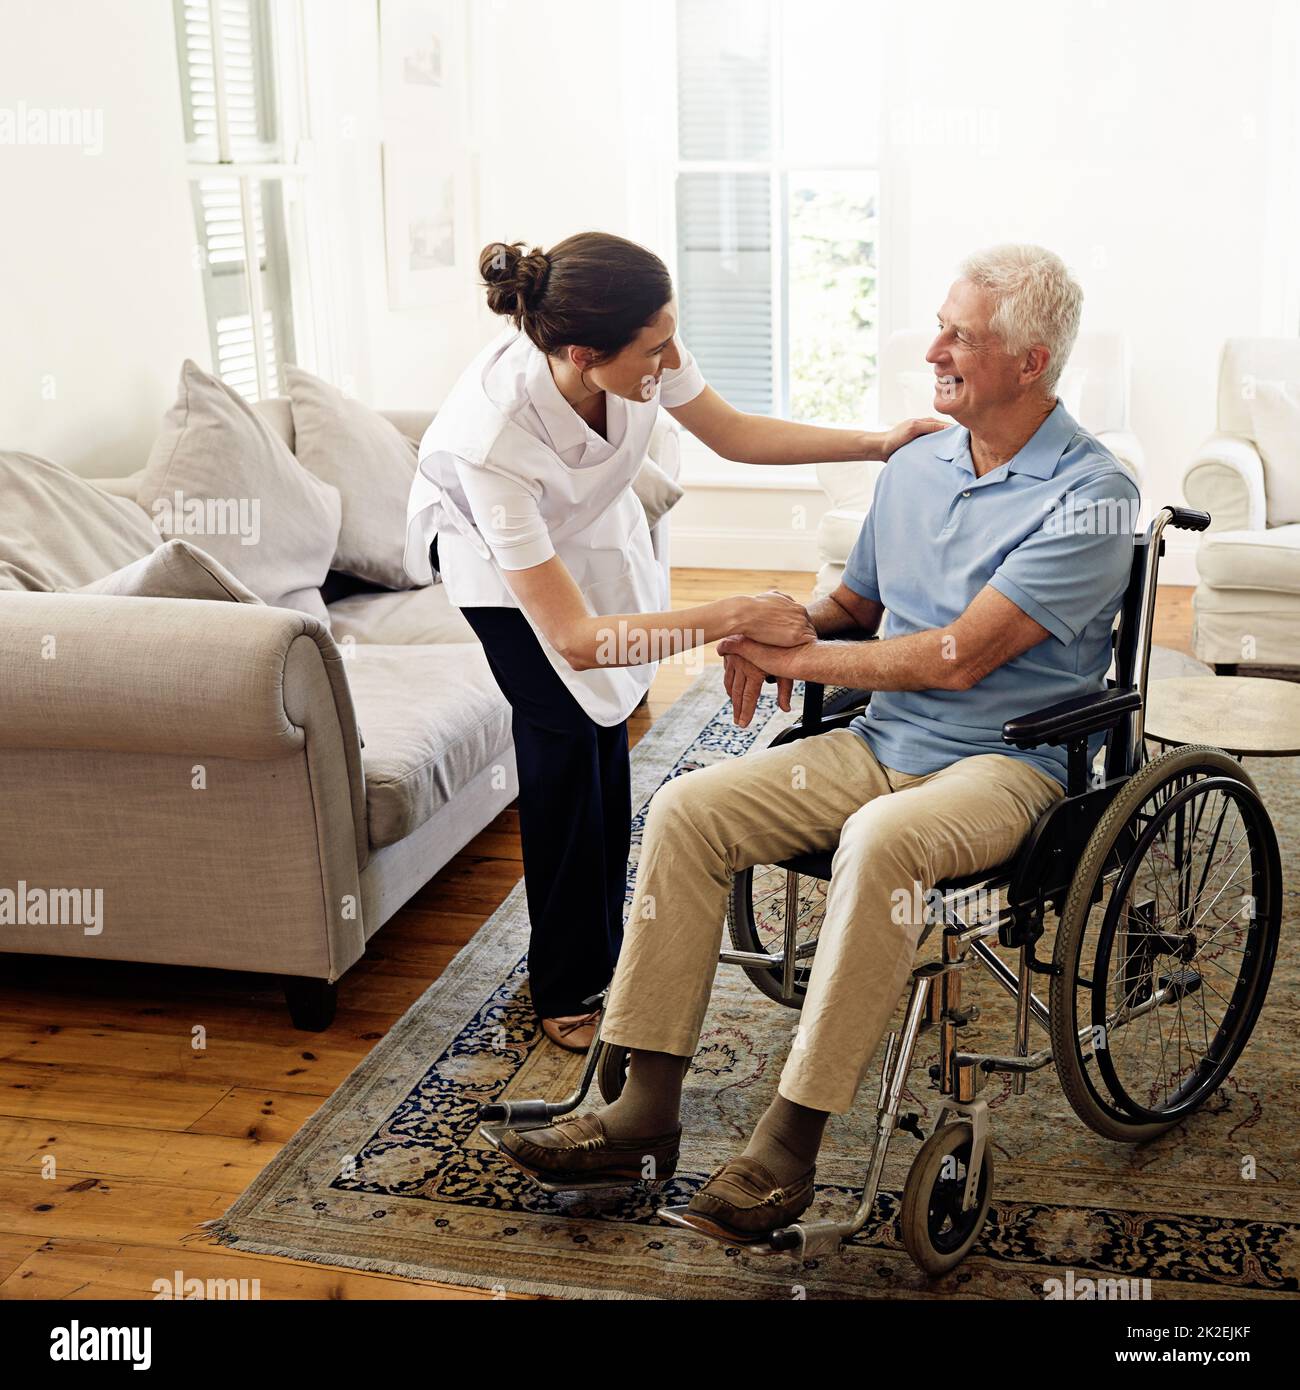 Taking care of the elderly is her calling. Shot of a caregiver helping a senior man in a wheelchair at home. Stock Photo